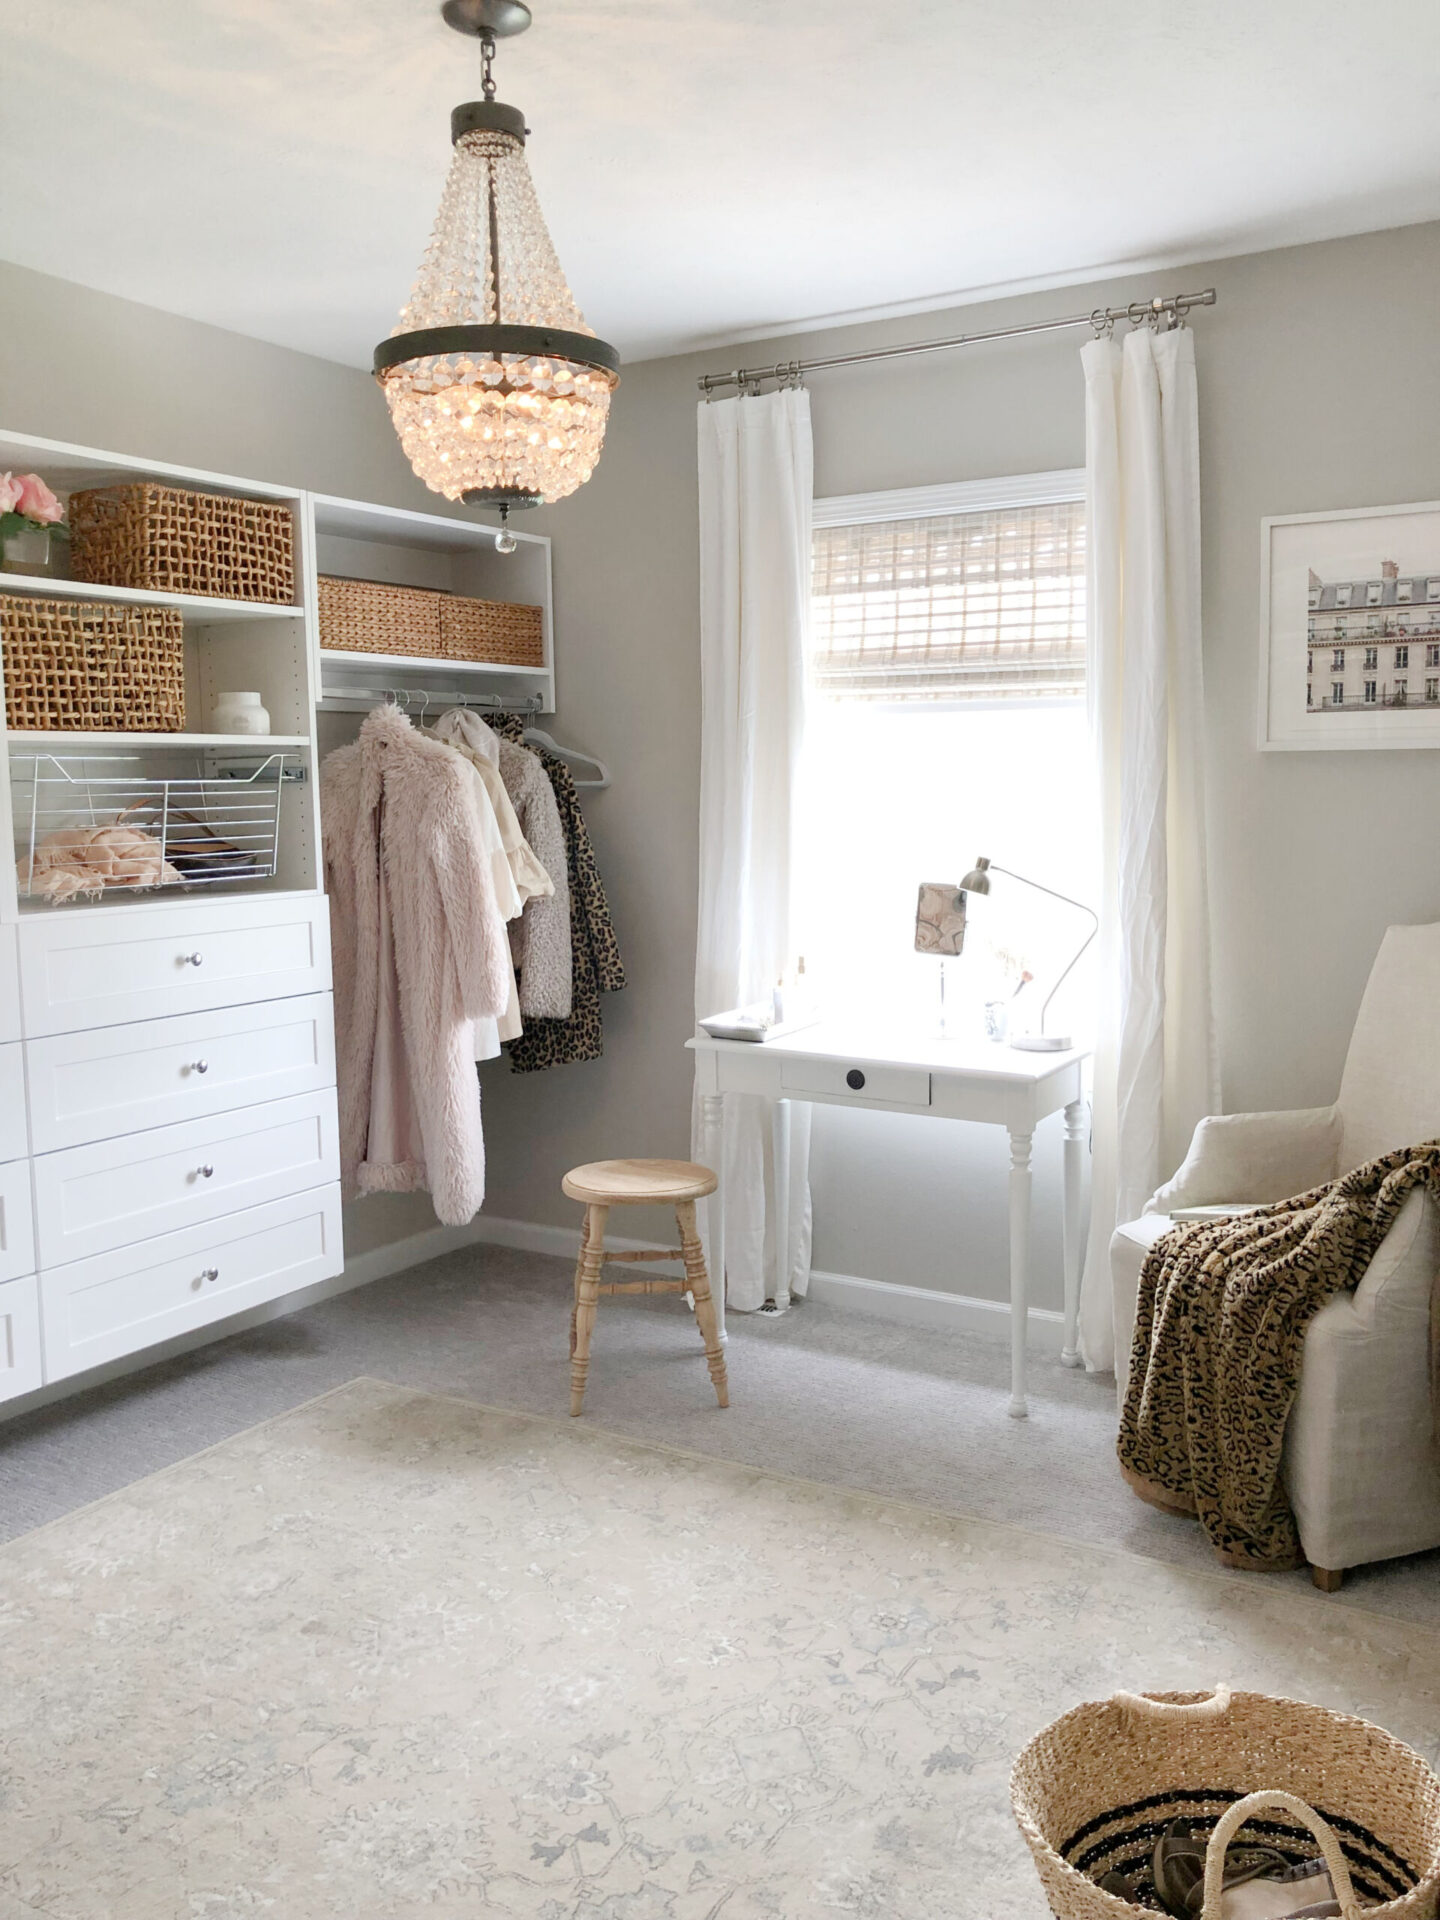 A DIY custom closet with a vanity/work area at the window was the perfect solution for this spare and awkward bedroom - Hello Lovely Studio. #customcloset #diycloset #cloffice